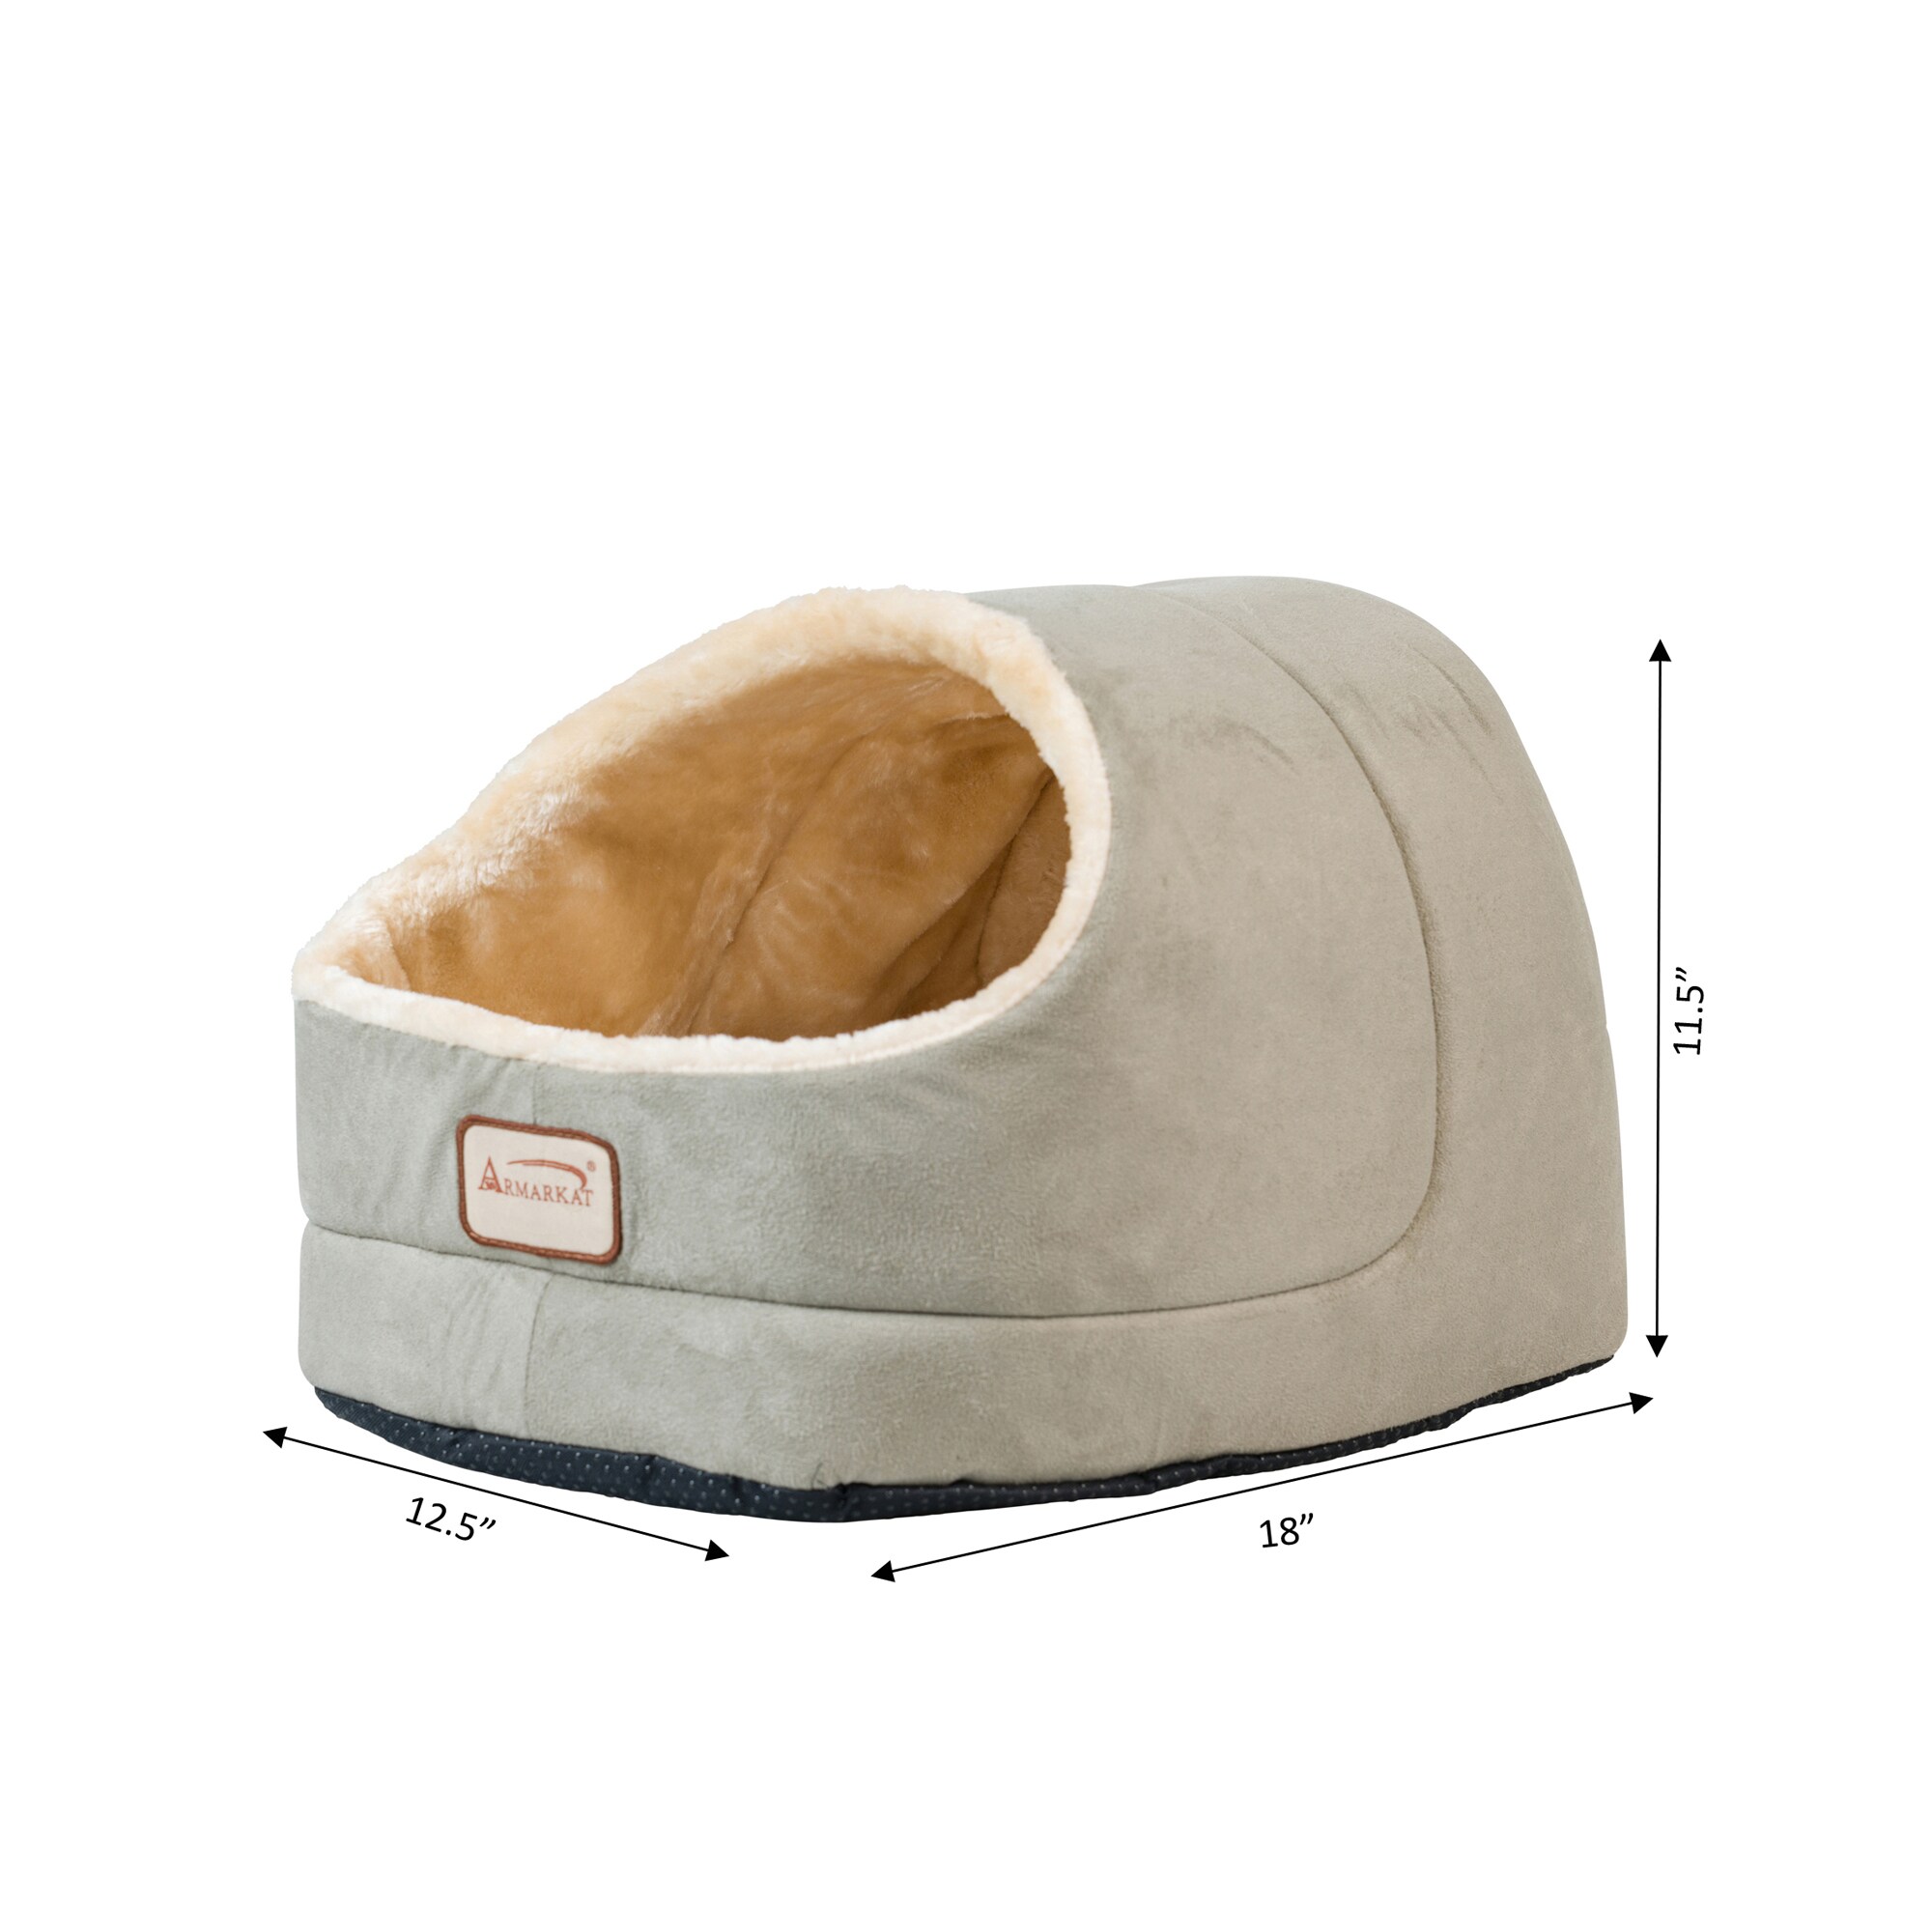 Armarkat Sage Green/Beige Suede Enclosed Cat Bed (Small) in the